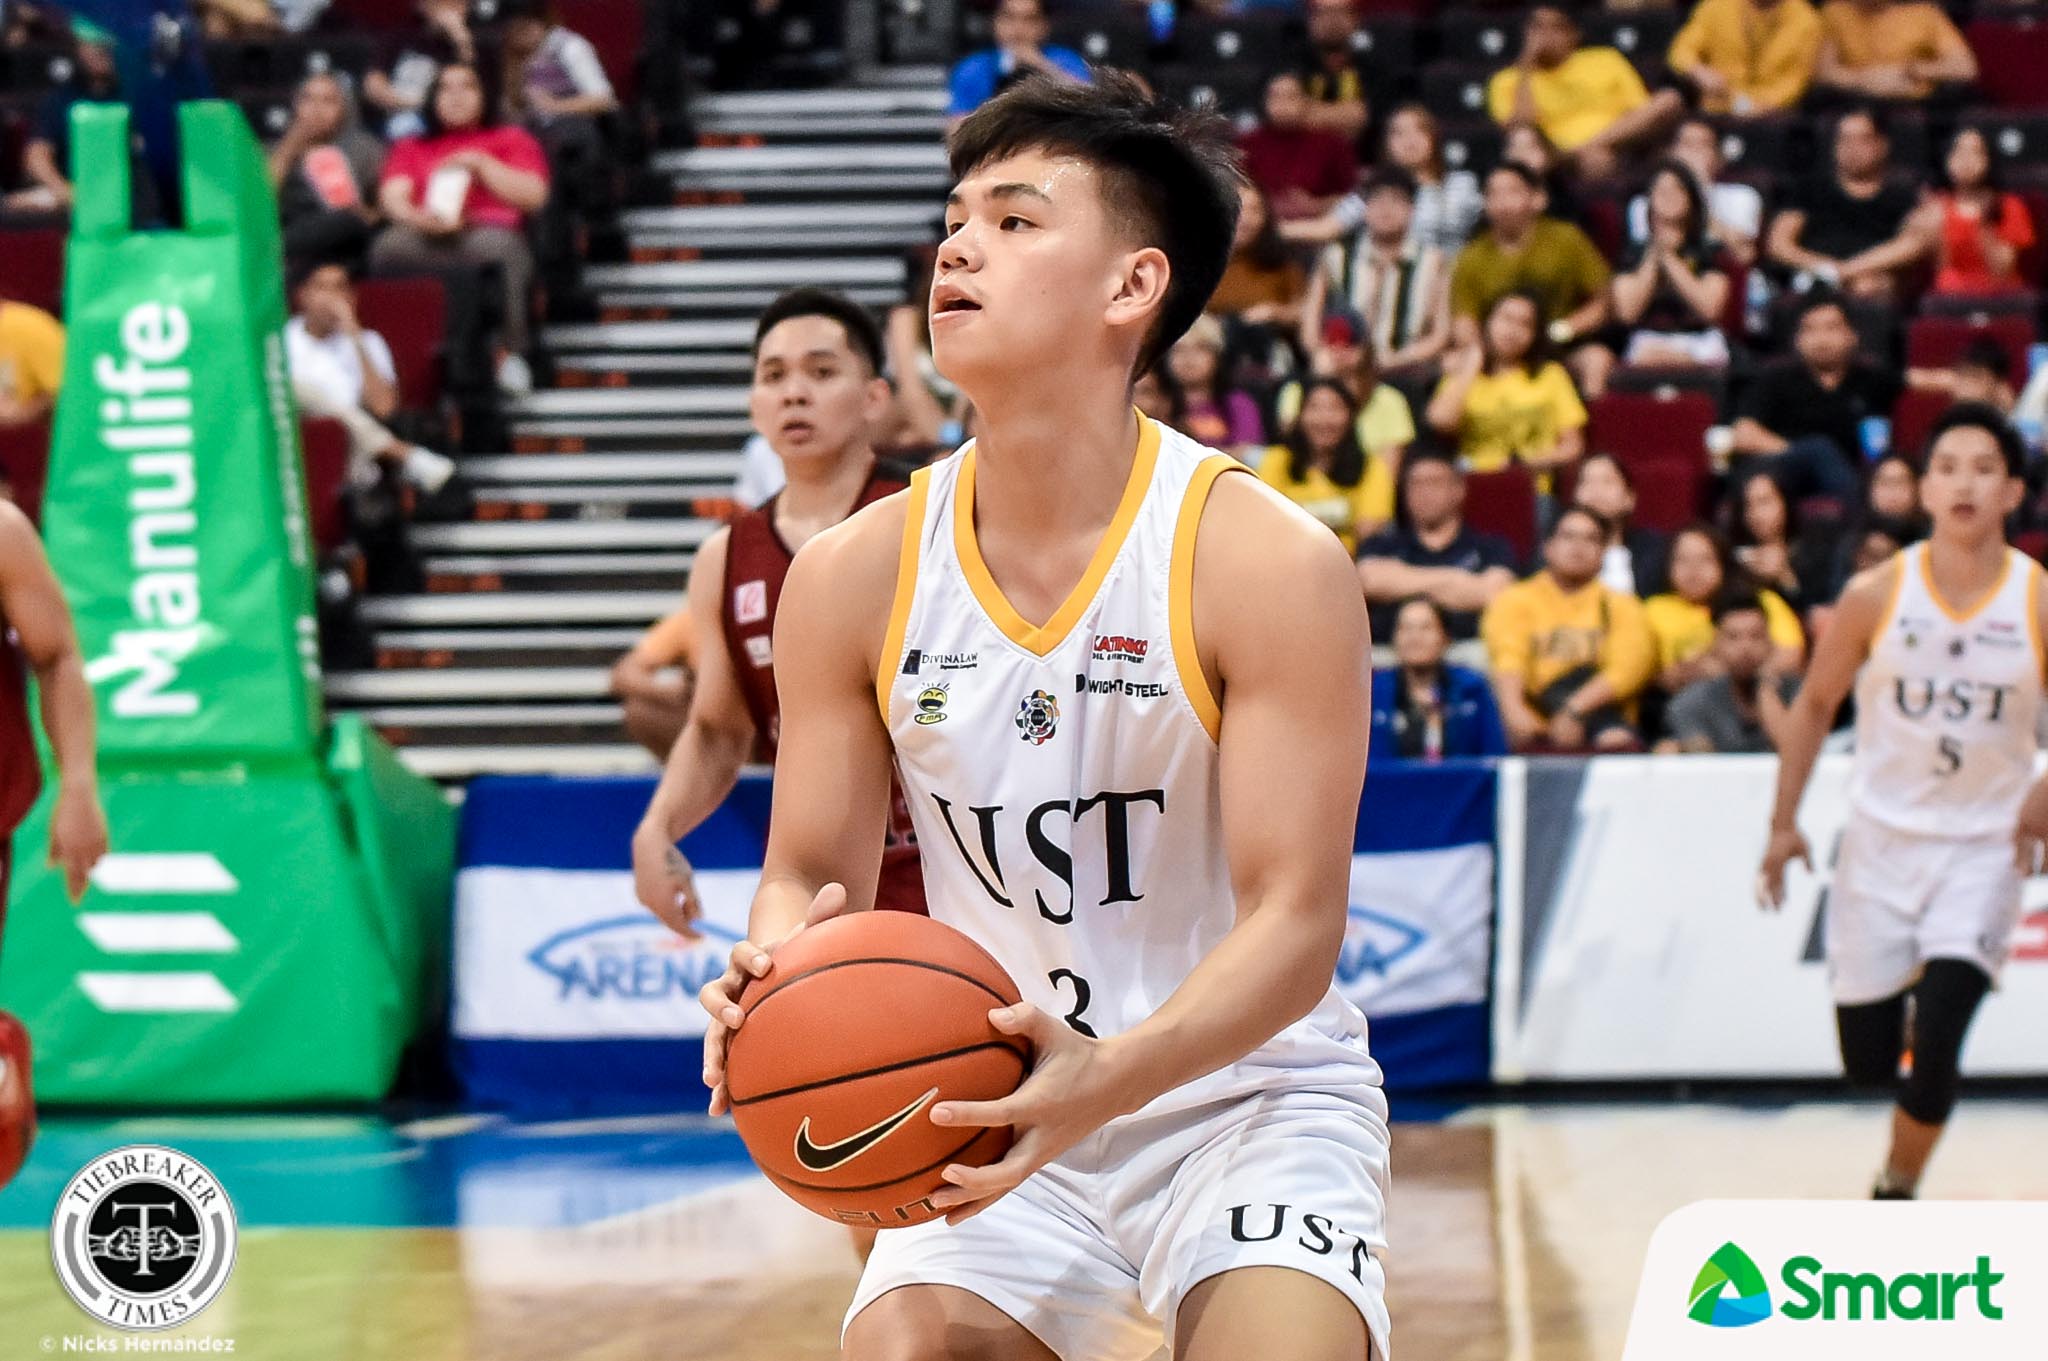 UAAP-82-MBB-UST-VS.-UP-UST-BRENT-PARAISO Subido, Paraiso made sure to take charge for UST Basketball News UAAP UST  - philippine sports news